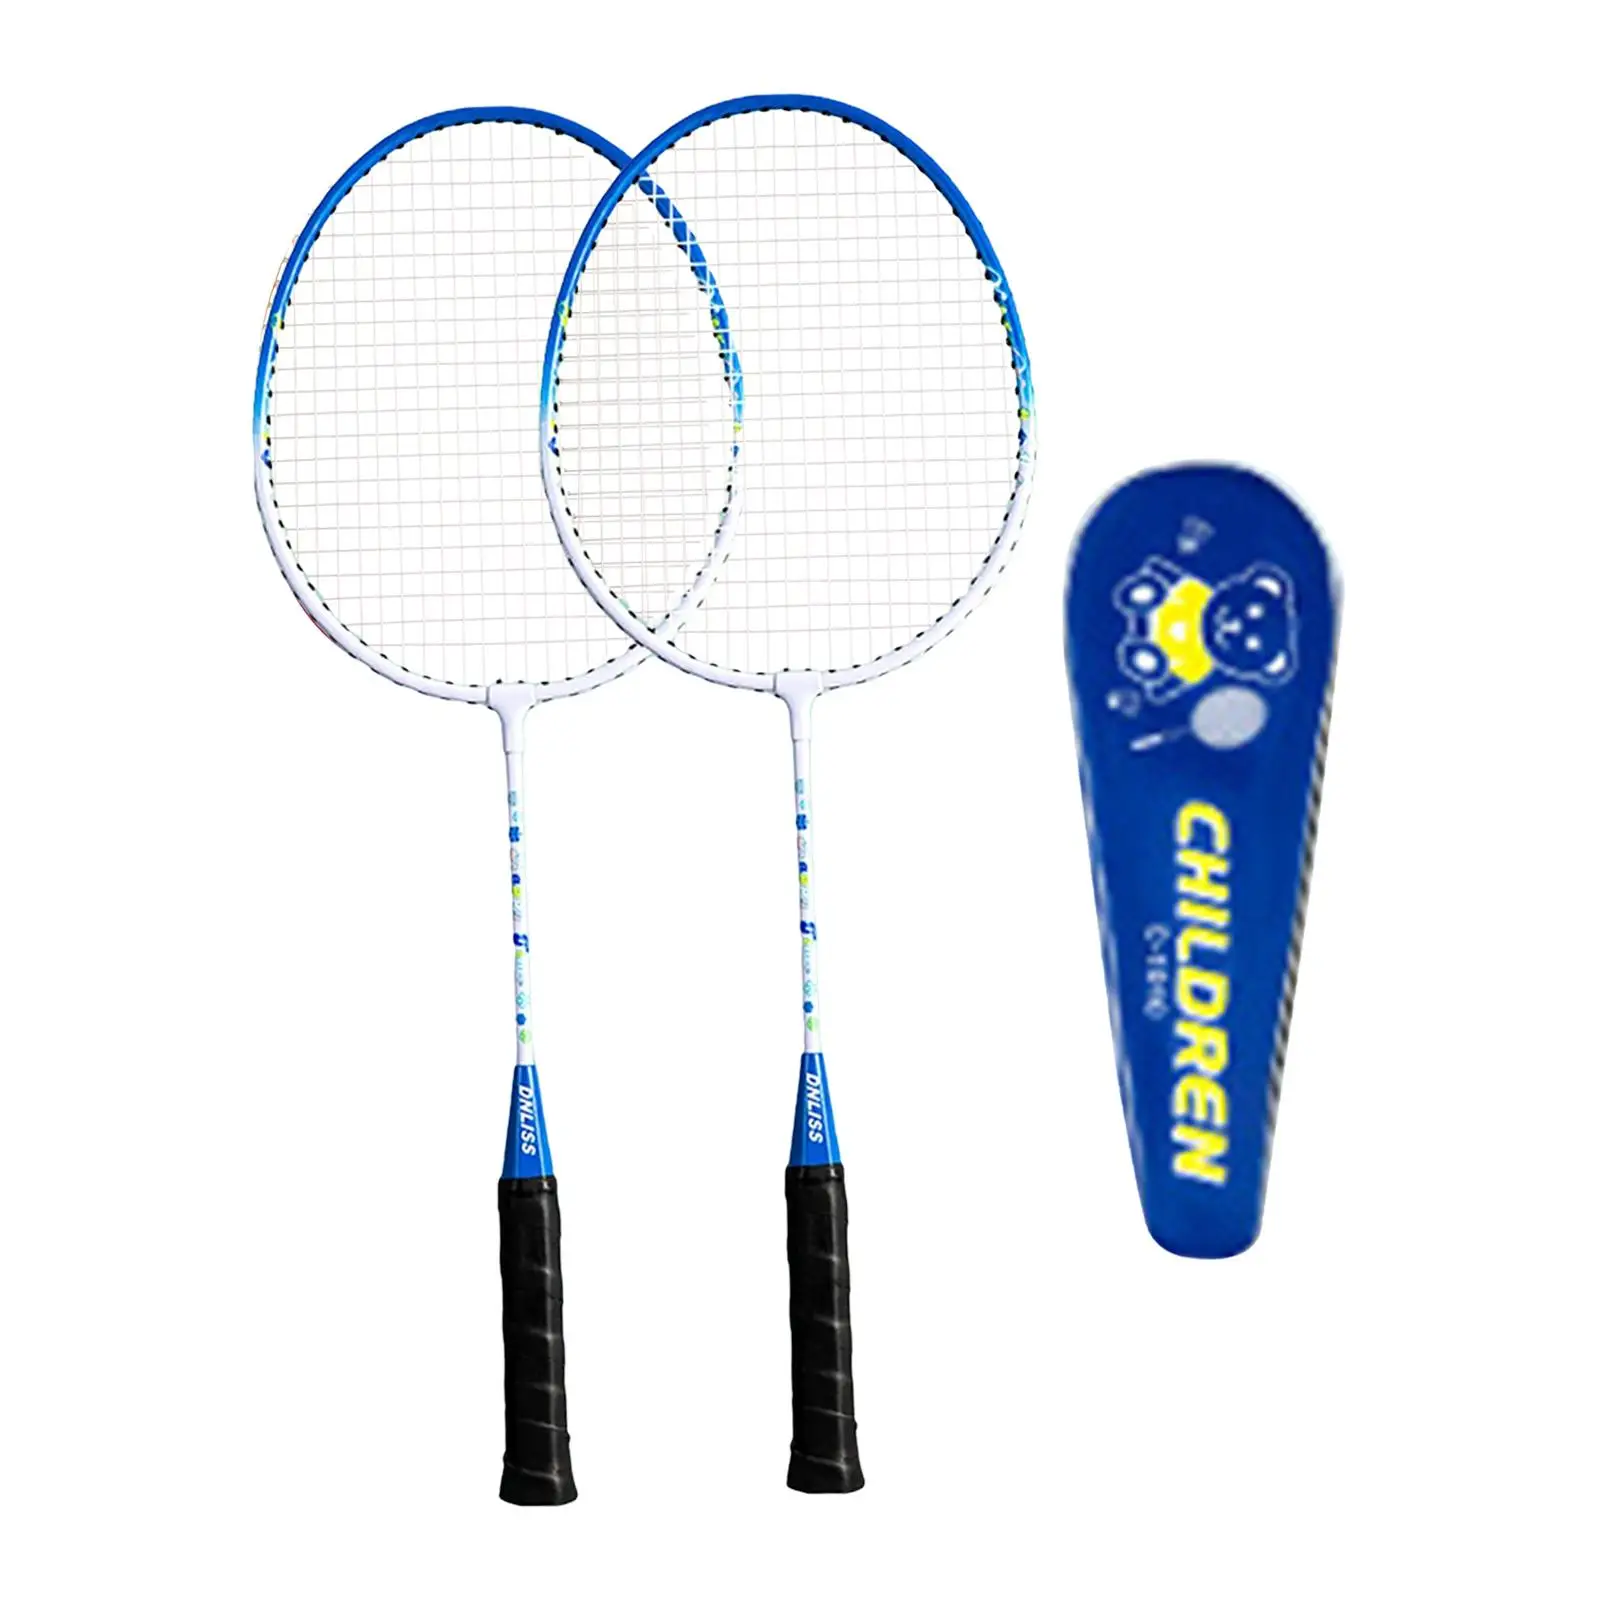 2Pcs Badminton Rackets Set with Cover Bag Beginners Portable for Kids Double Racquets for Game Tennis Backyard Outdoor Training